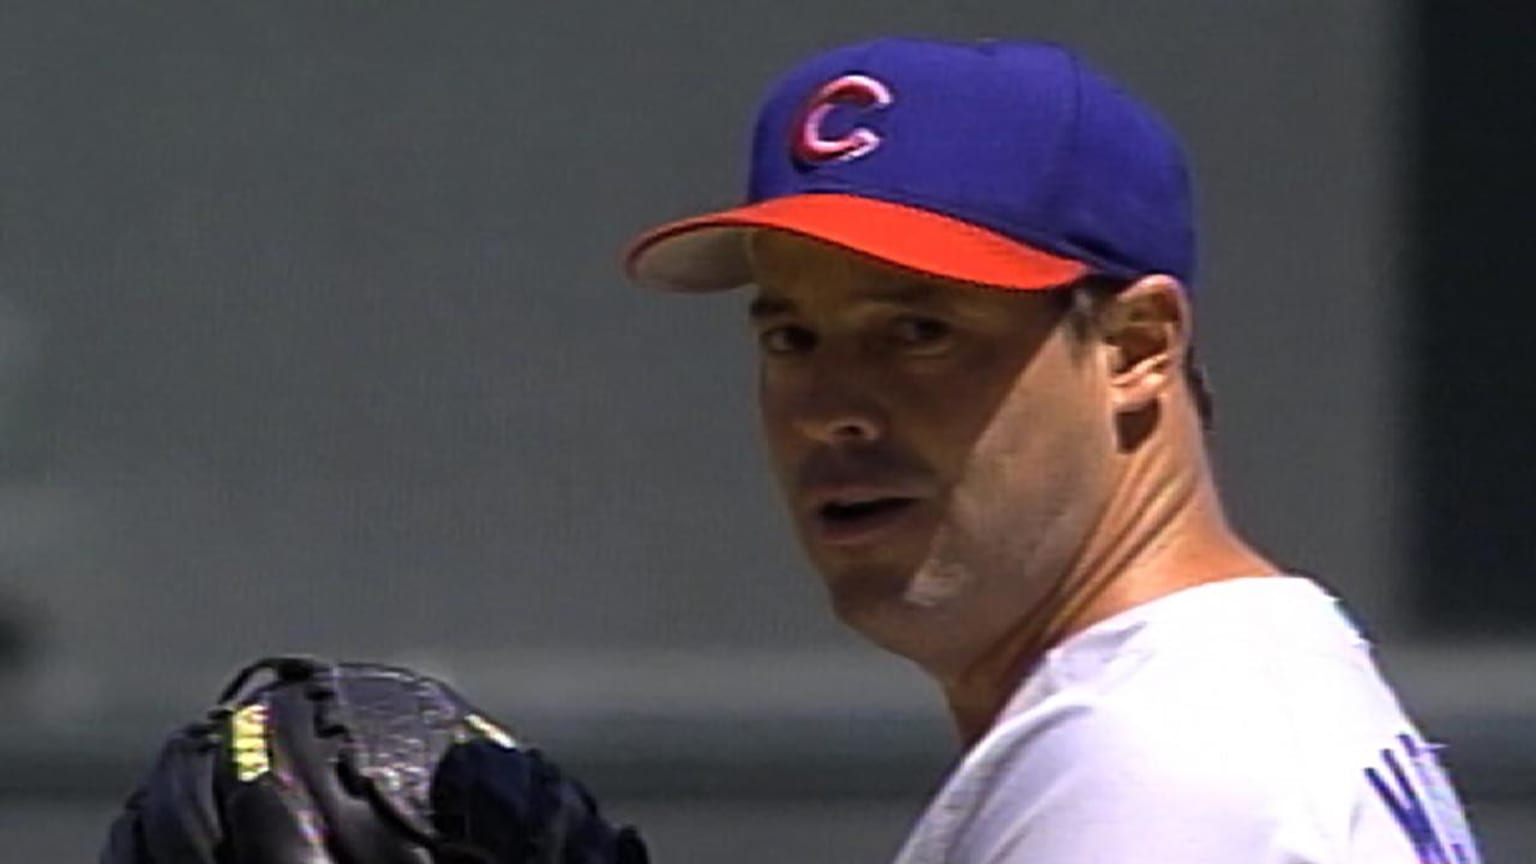 Cubs honor Maddux for 300th win